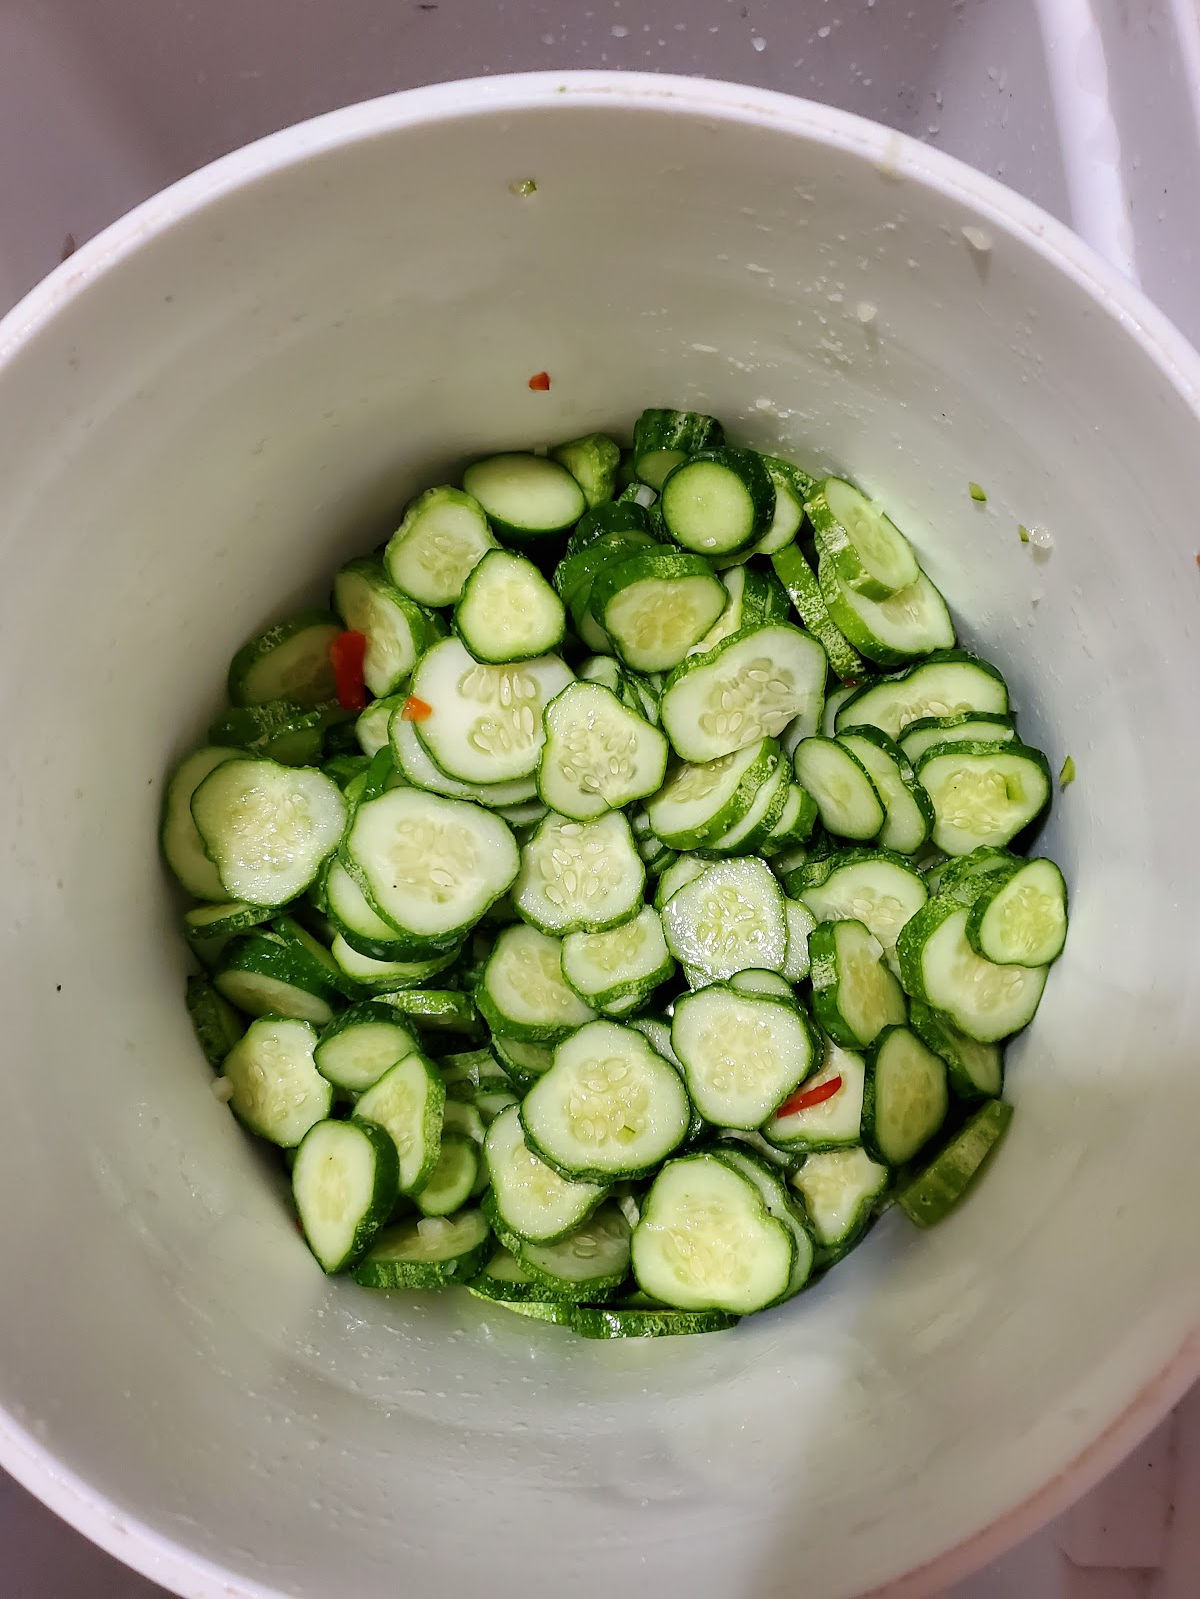 White 5-gallon bucket with sliced pickling cucumbers, red and green bell pepper slices, and yellow onion.